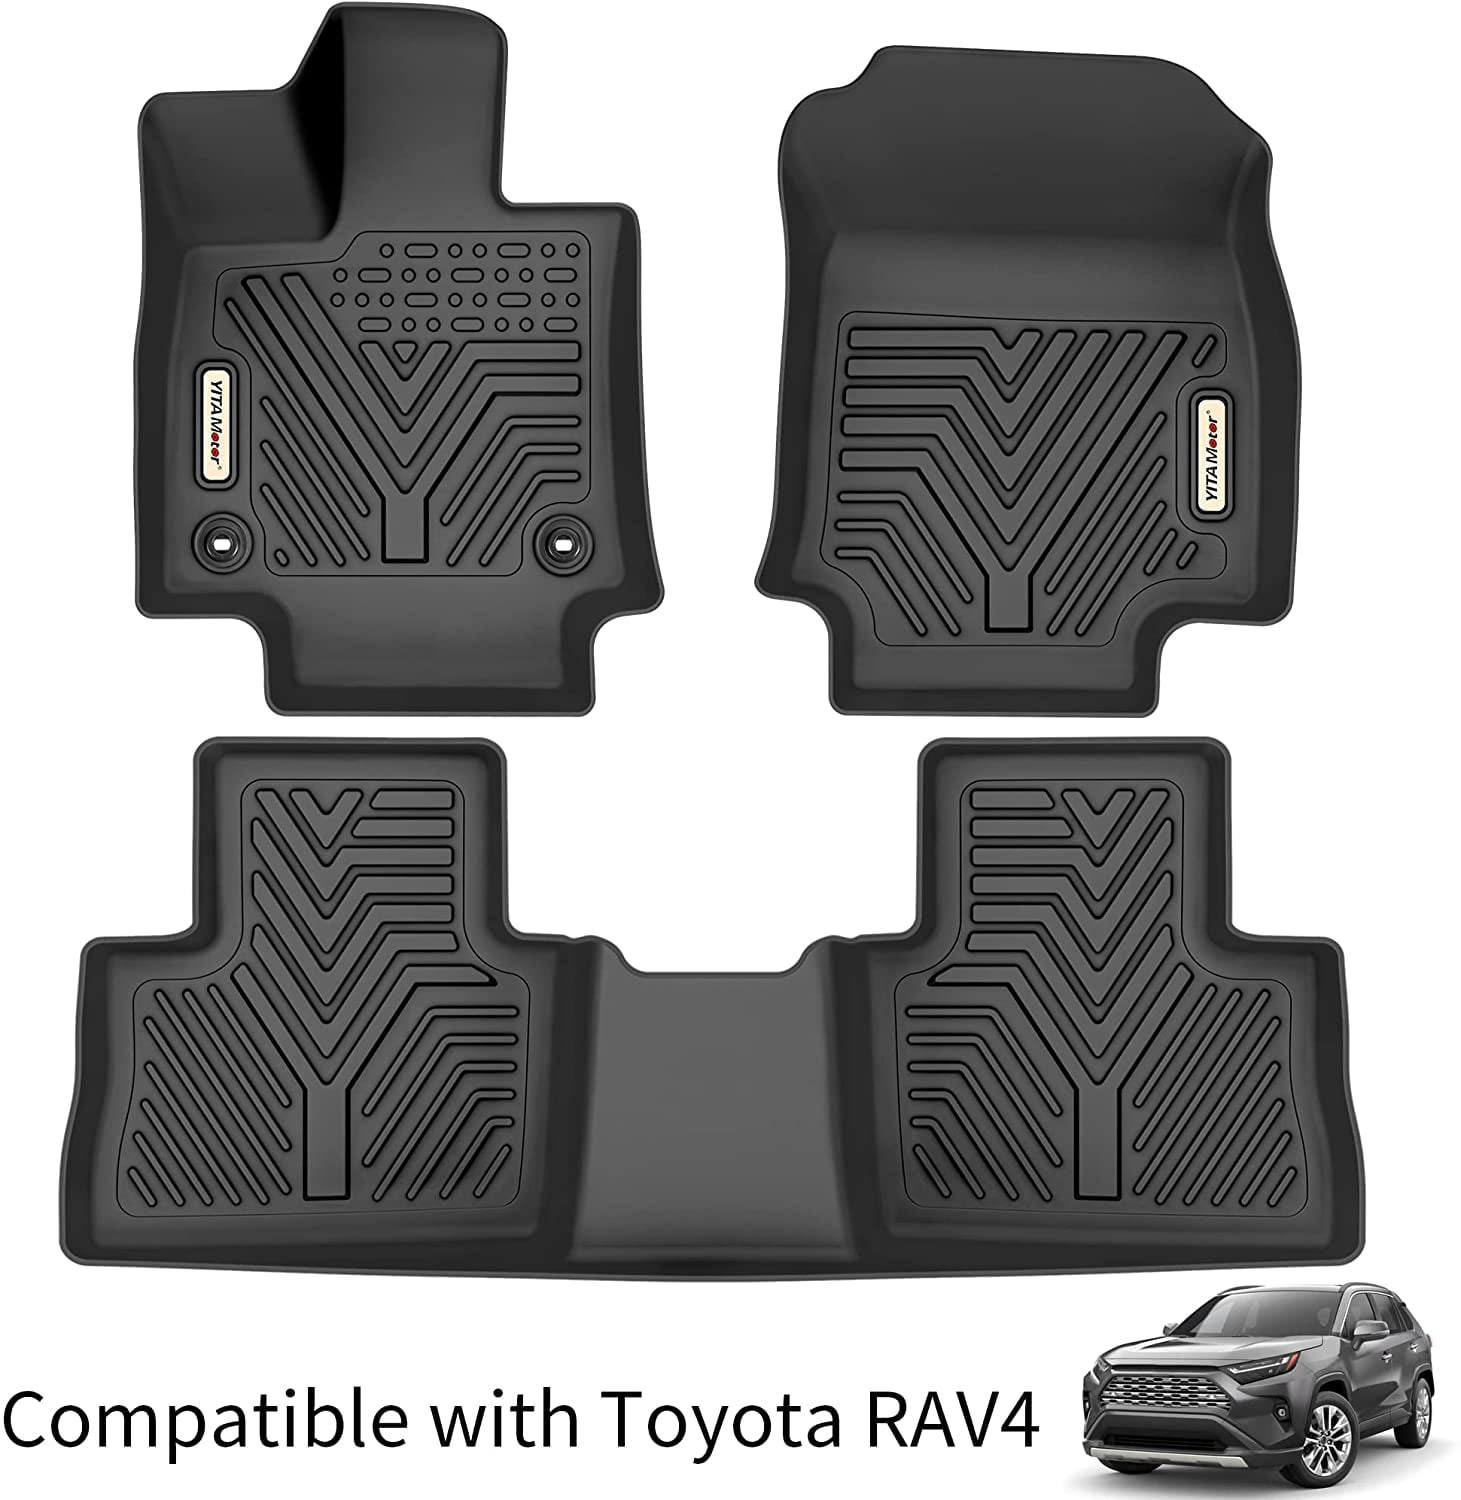 Lasfit Floor Mats and Mats Weather (No Toyota Liners TPE Hybrid All Black Car 2019-2023 for Material, RAV4 Prime Model)